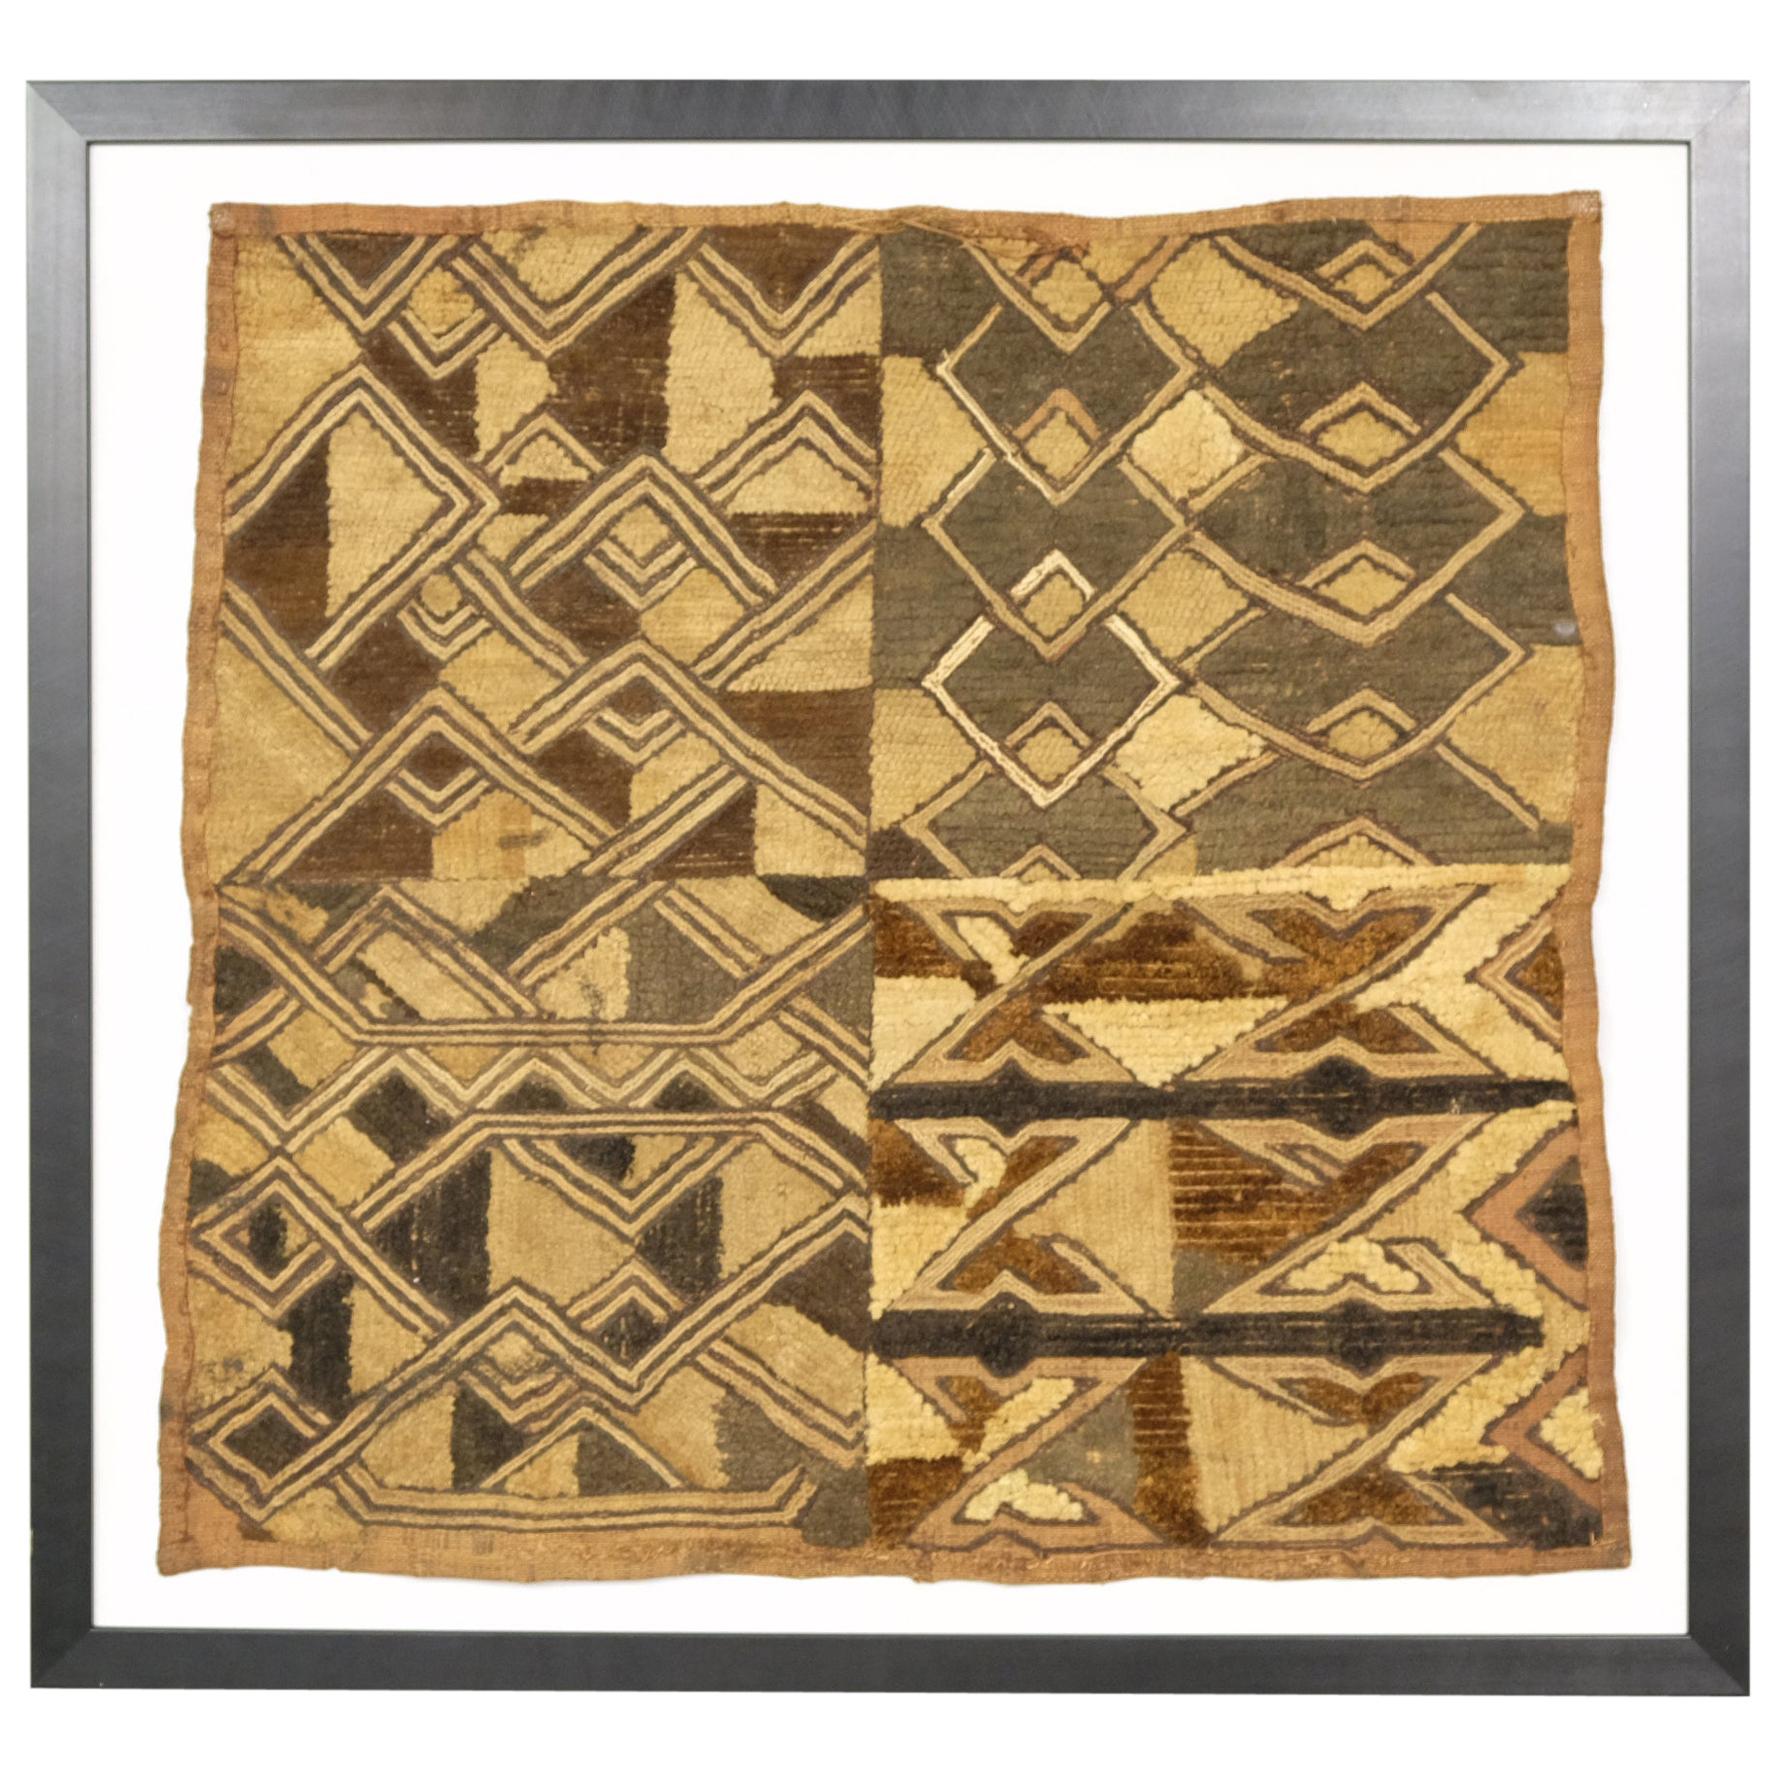 Framed Kuba Cloth #1, African Textile, Tribal, Ethnic Wall Hanging, 20th Century